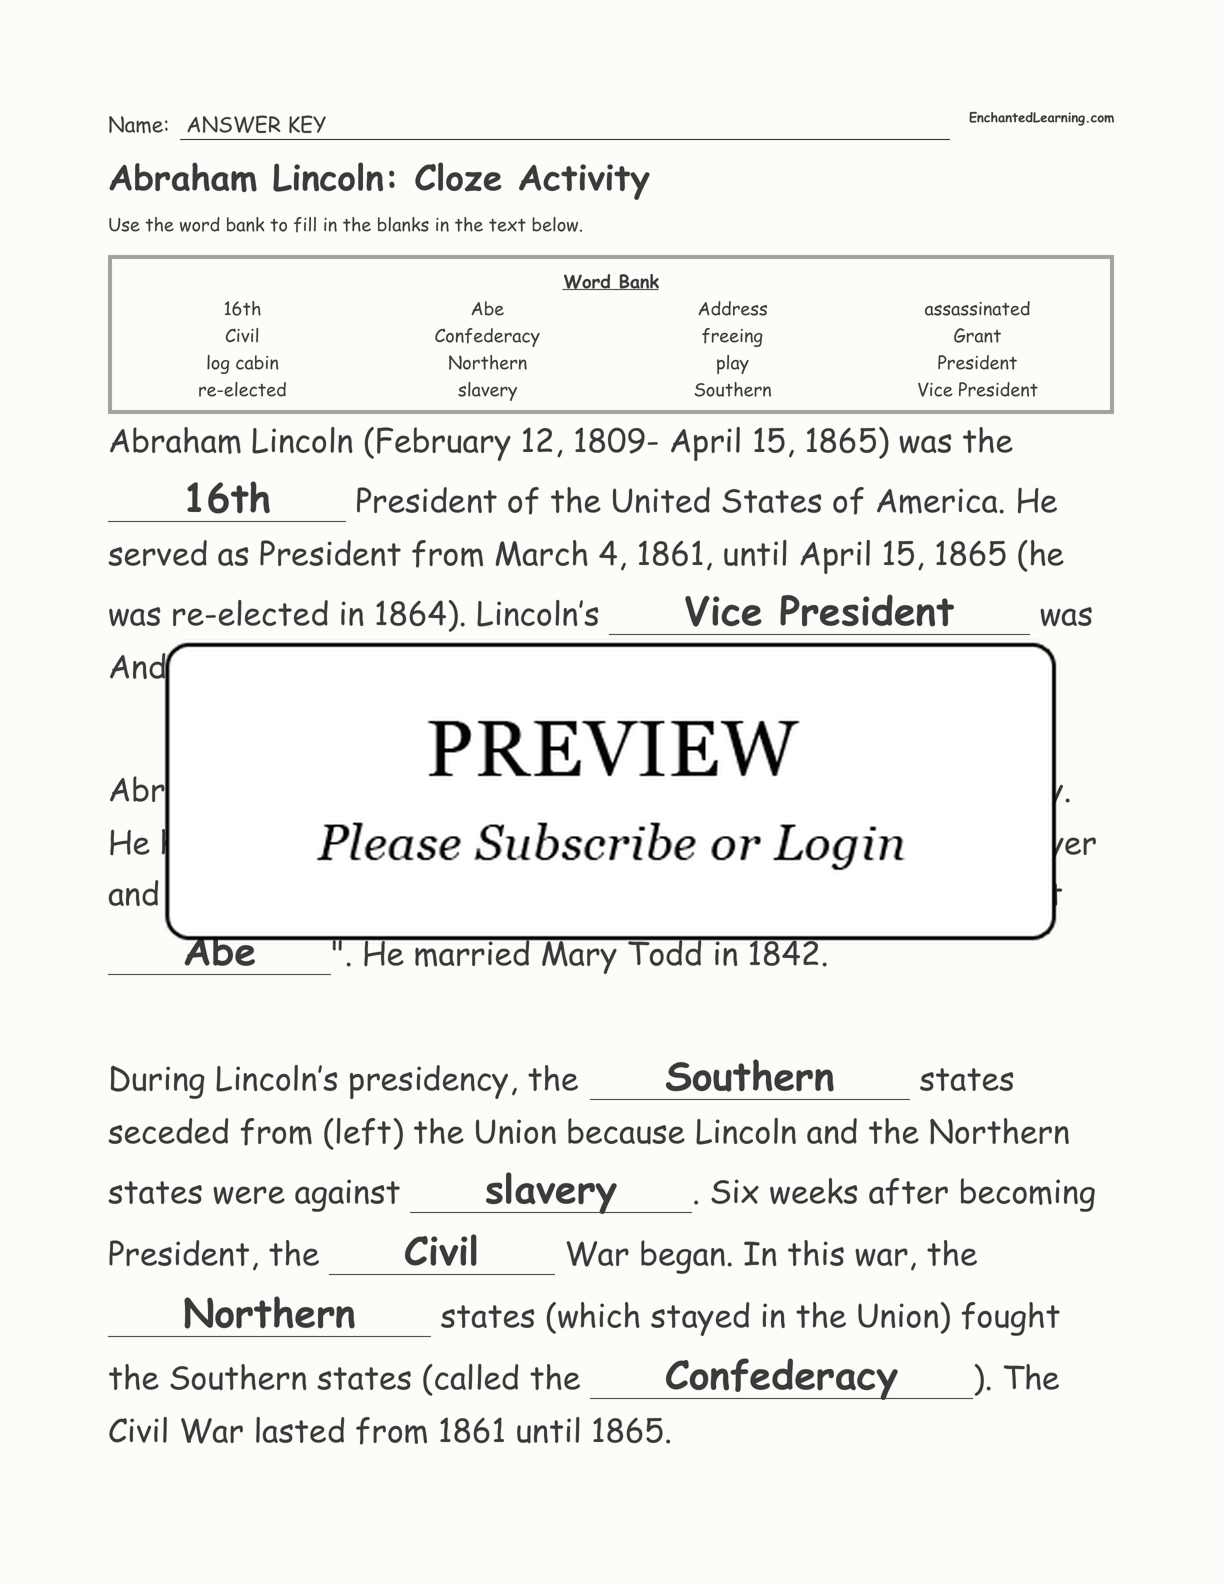 Abraham Lincoln: Cloze Activity interactive worksheet page 3